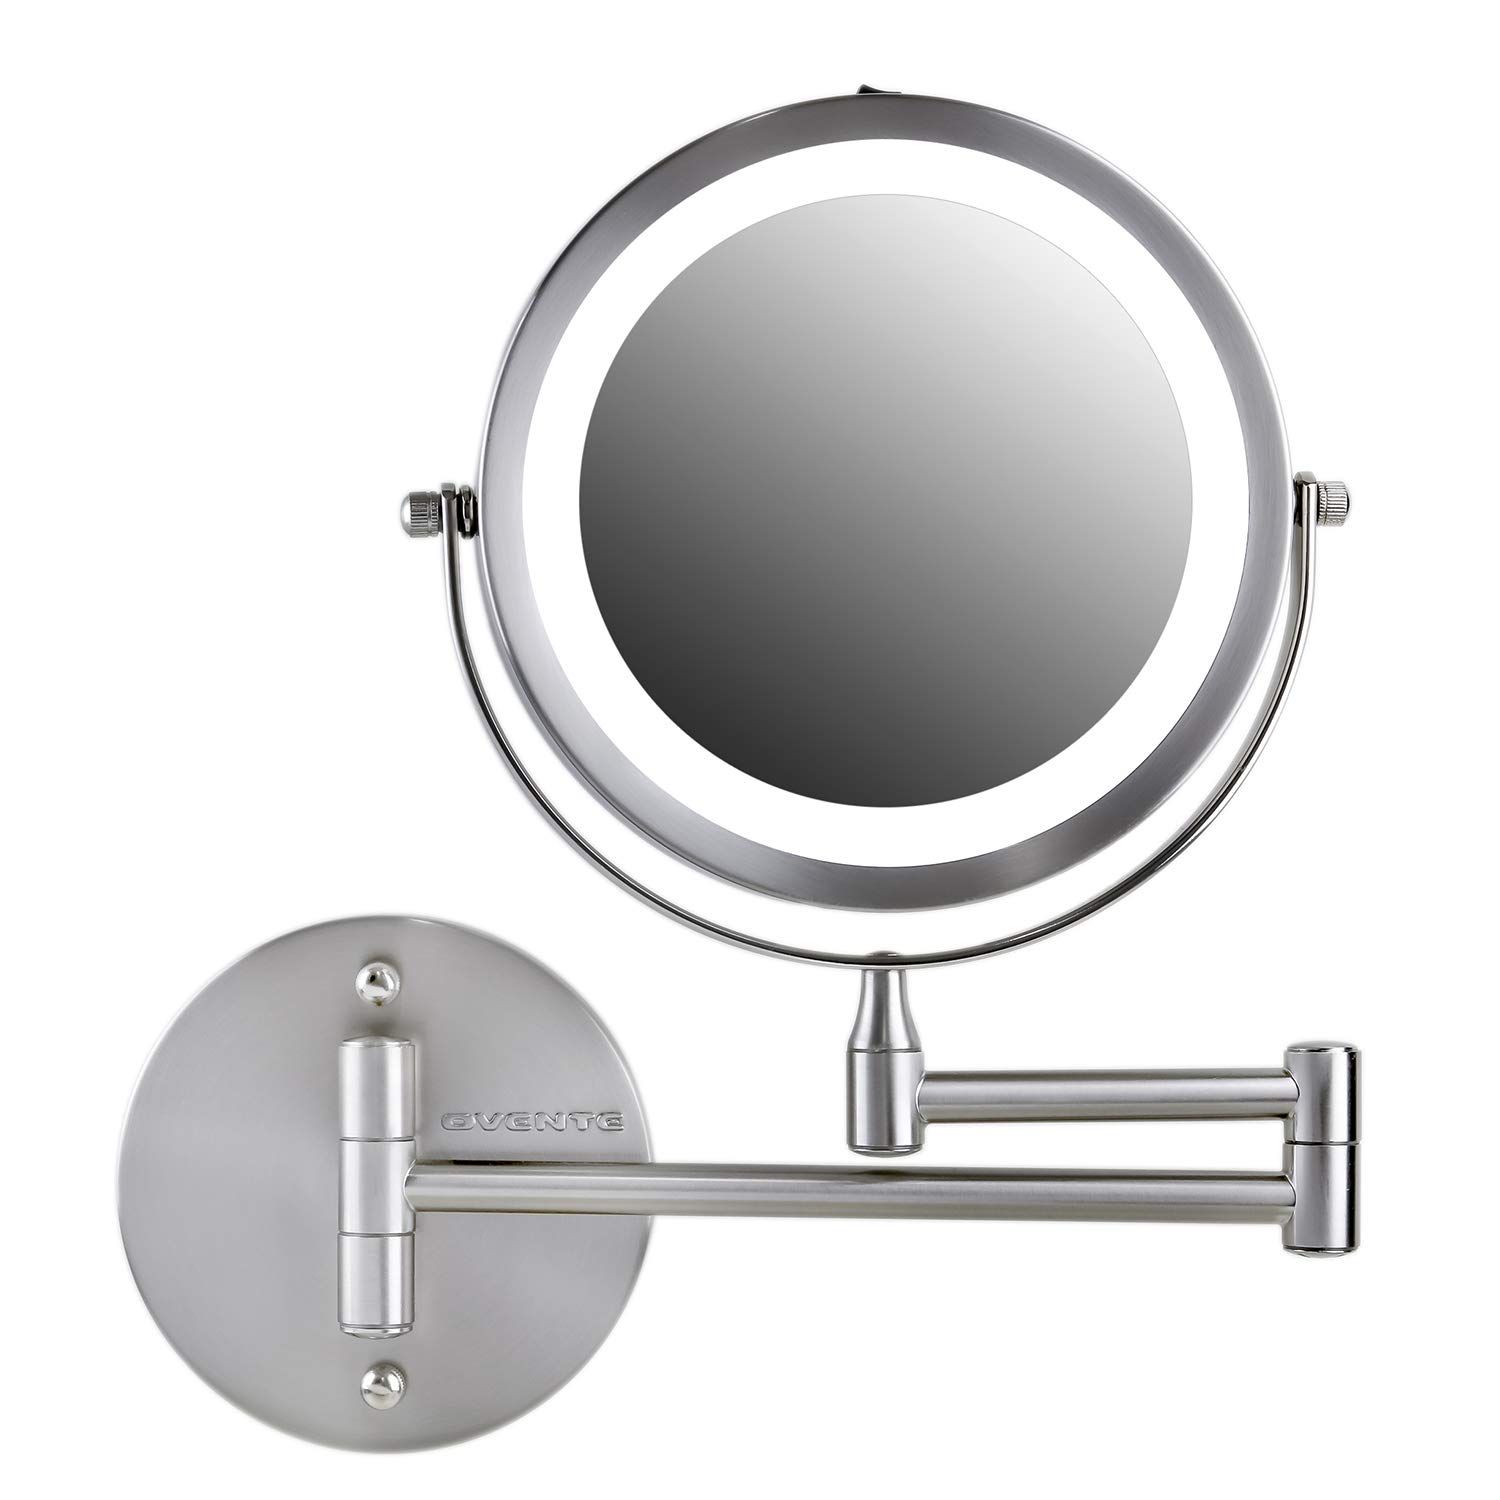 Ovente Lighted Wall Mount Makeup Mirrors 7 Inch 1x 10x Magnification Inside Single Sided Polished Nickel Wall Mirrors (View 3 of 15)